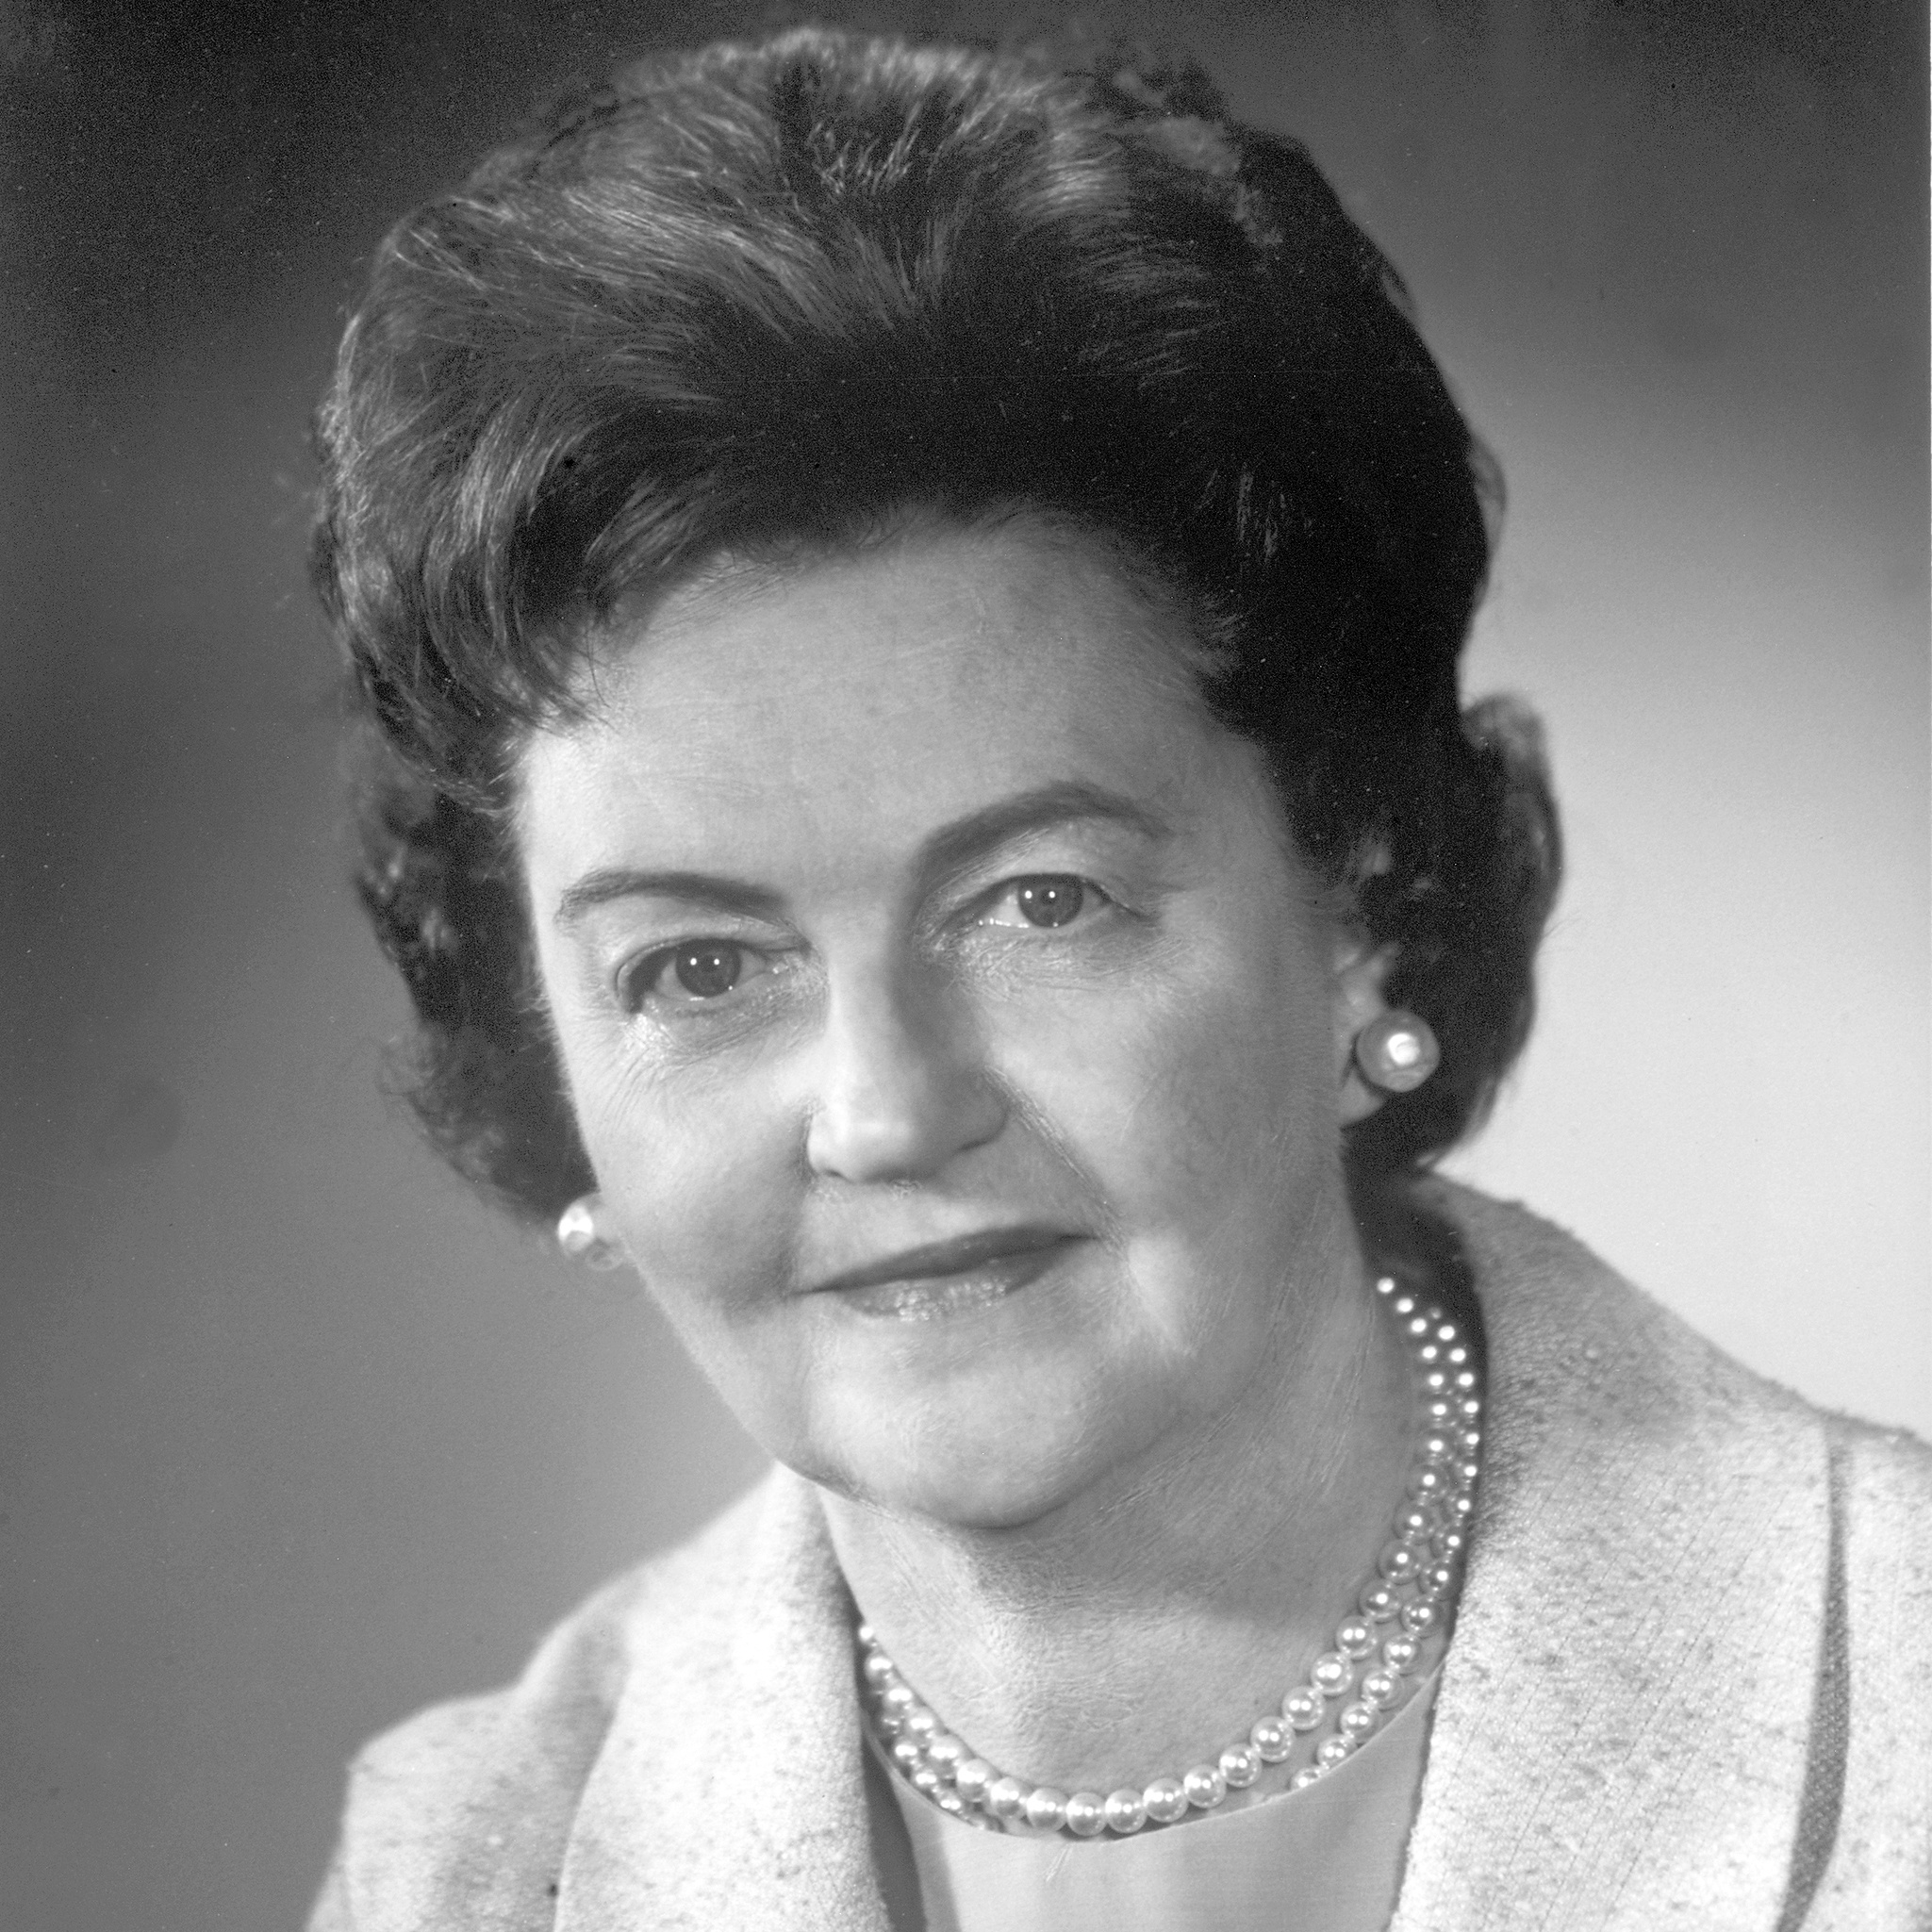 Professional photo of Bernice Eddy in a suit with a pearl necklace